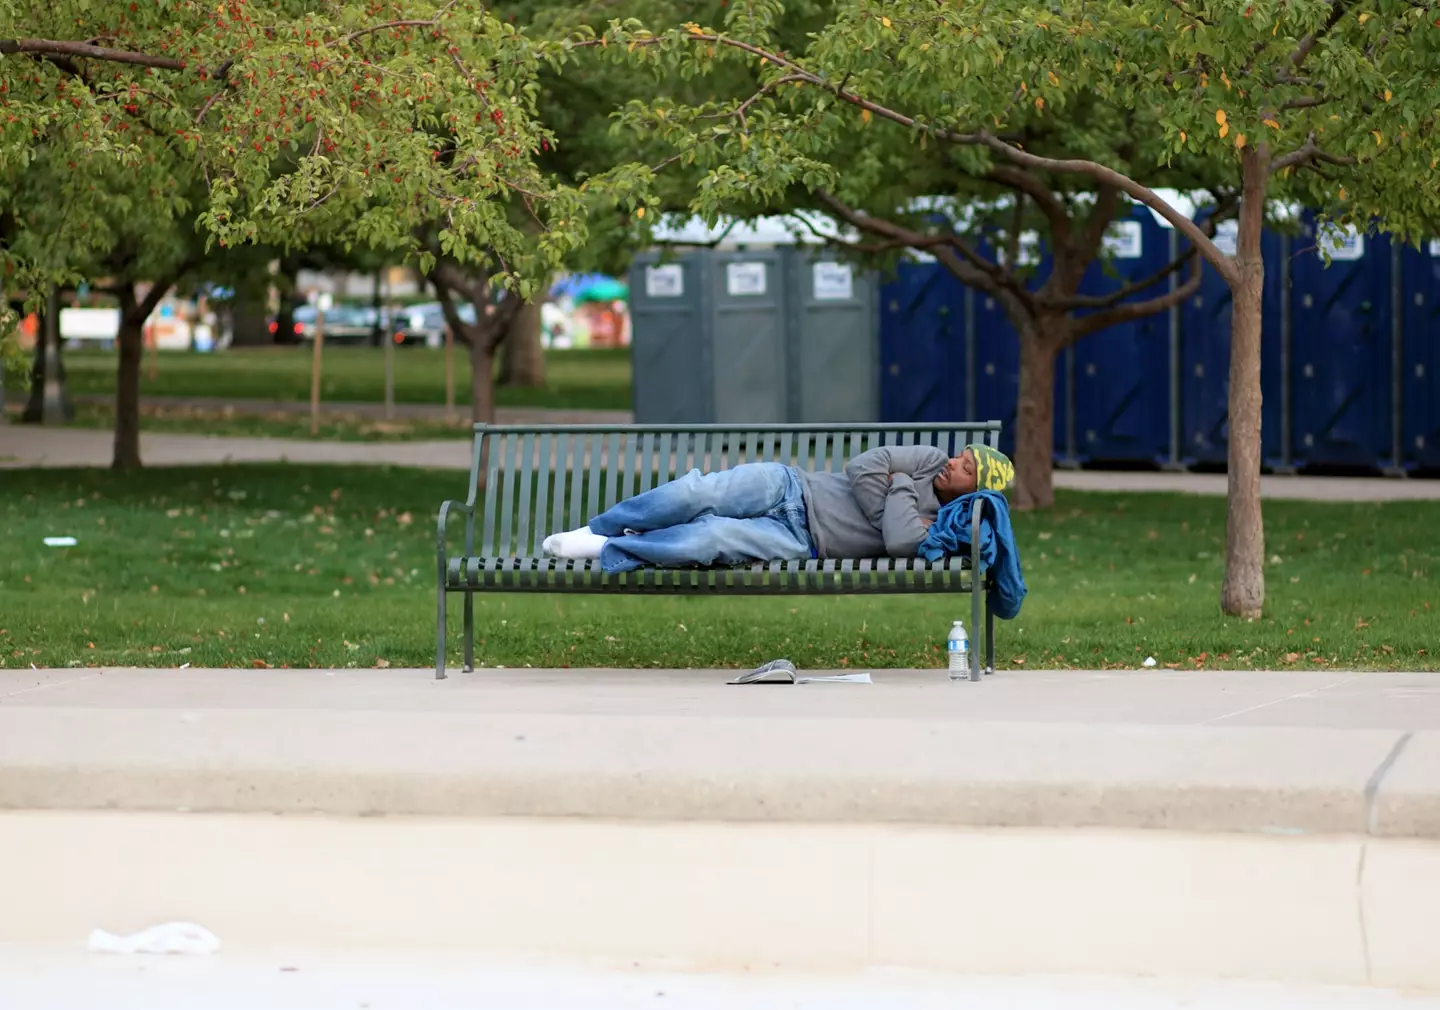 The plan is set to help those struggling with homelessness in Denver.